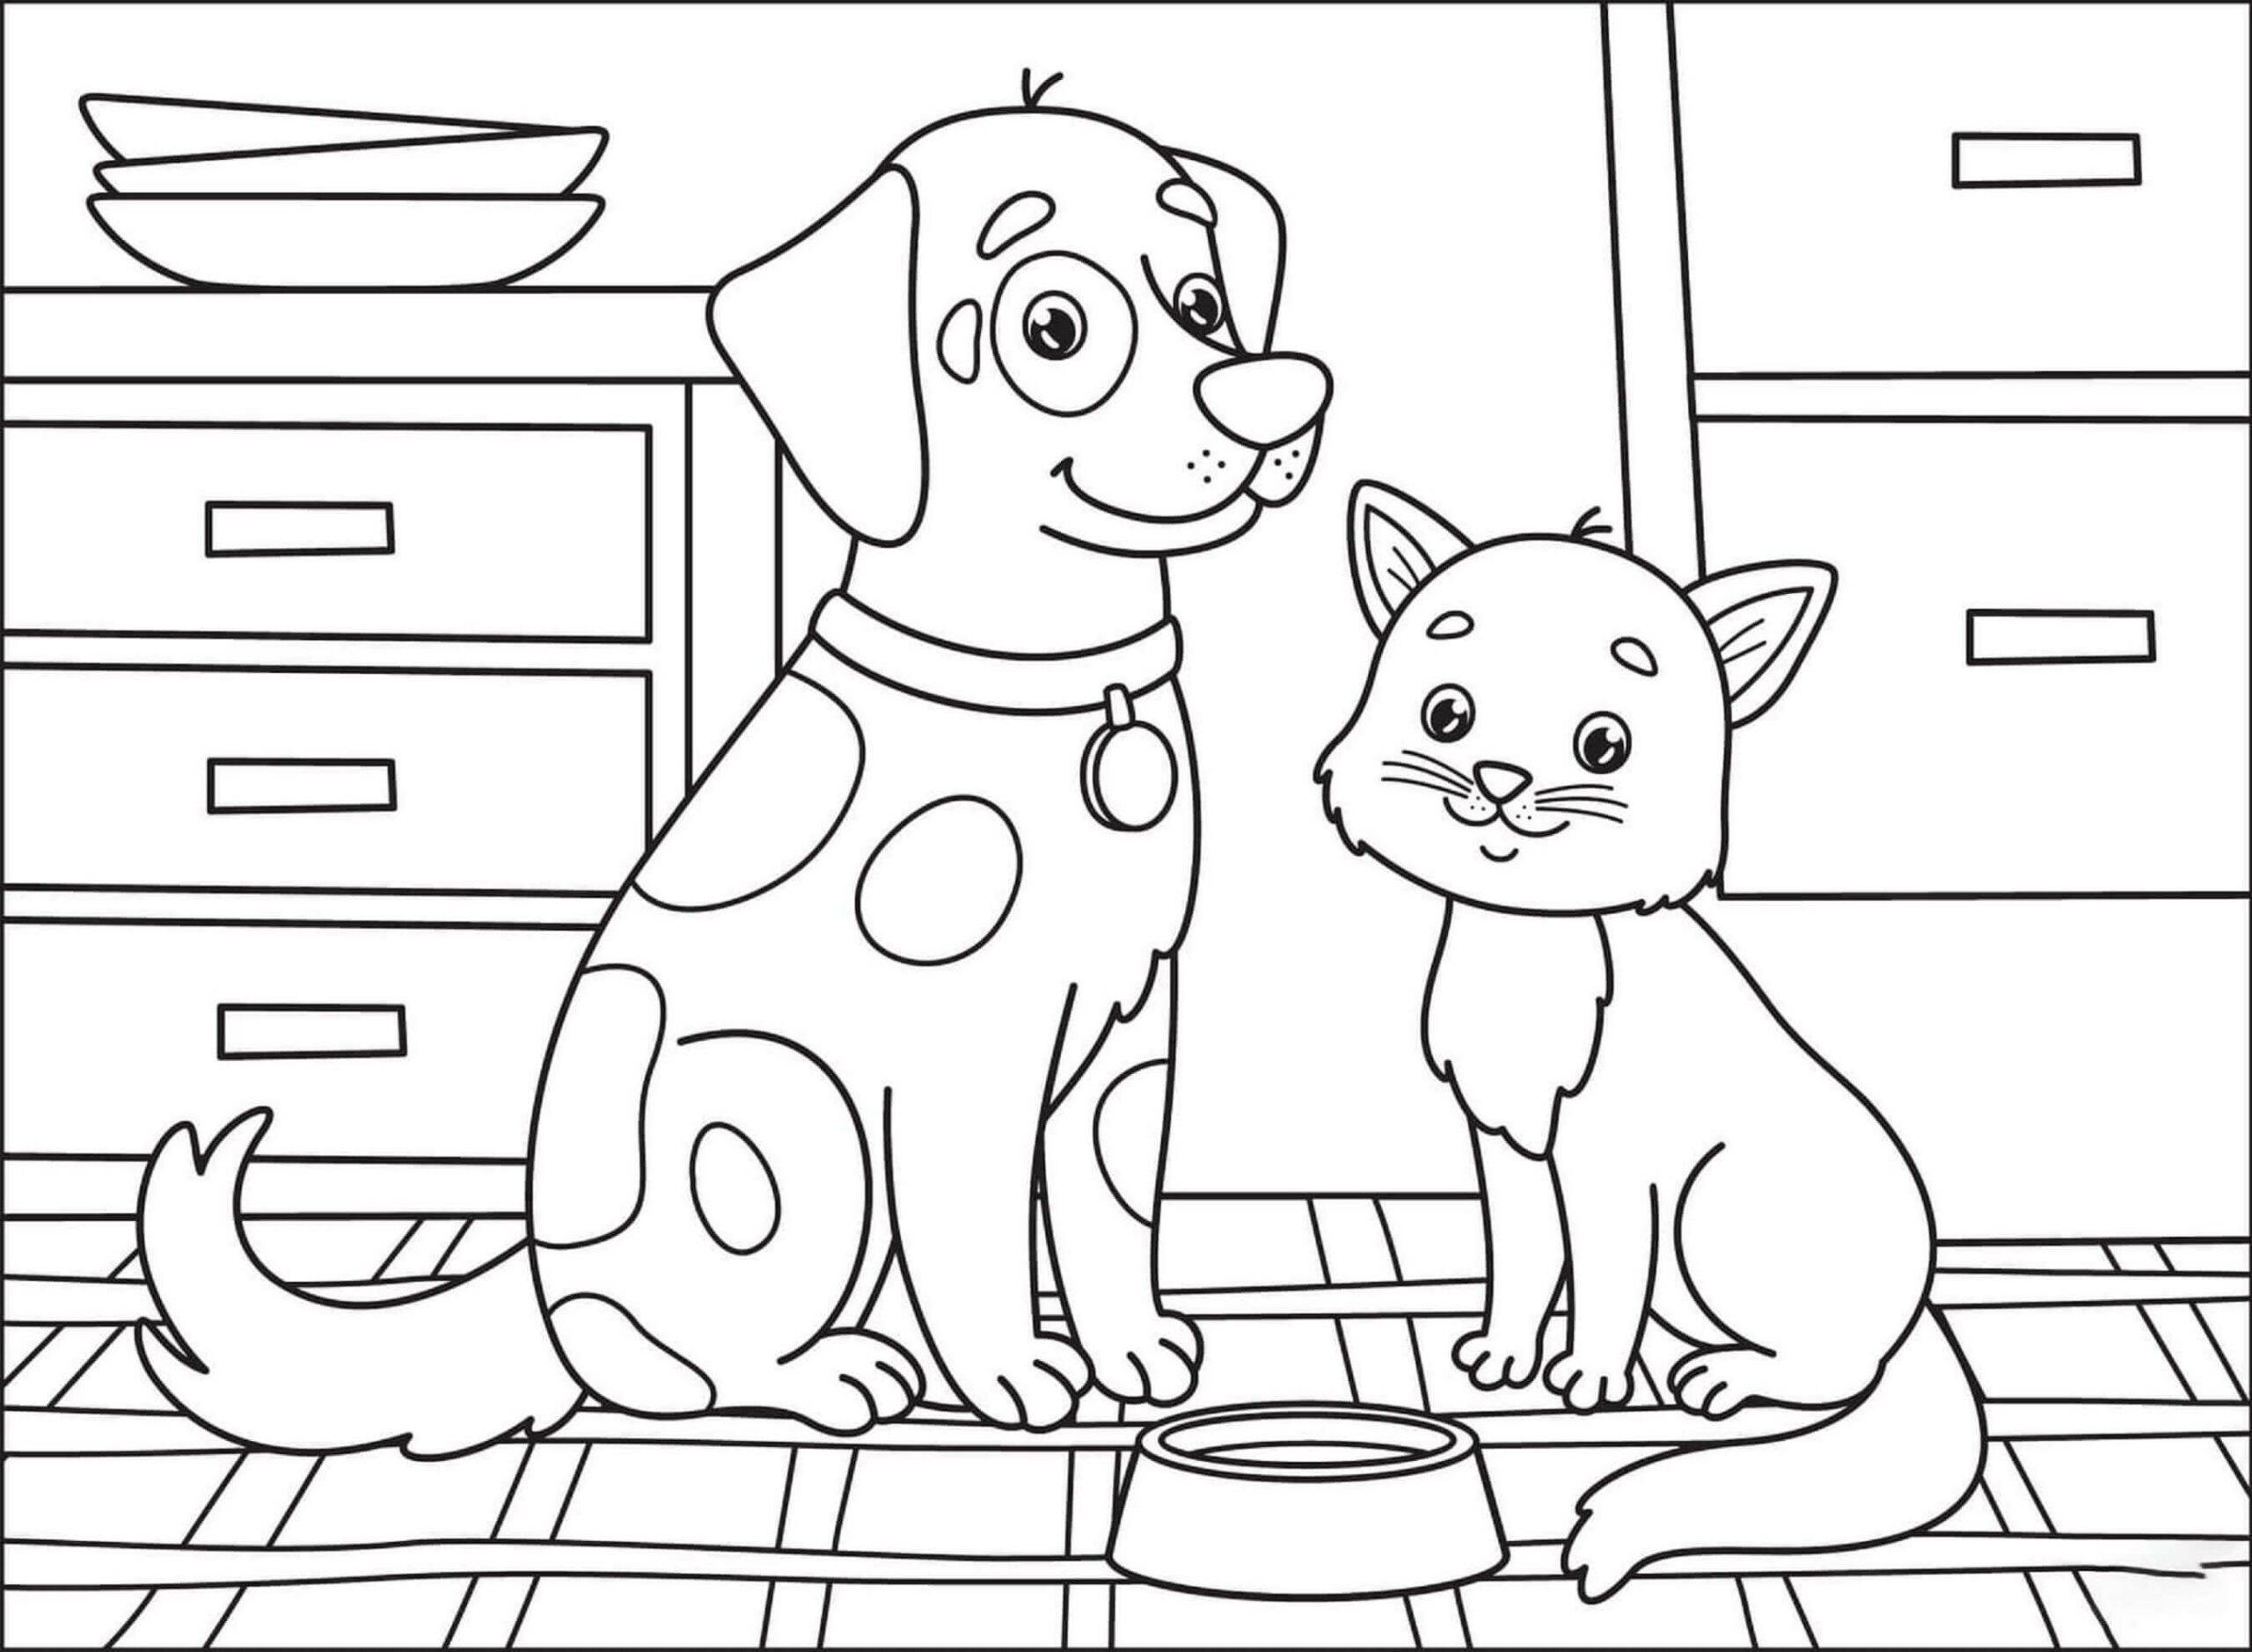 printable-coloring-pages-of-puppies-and-kittens